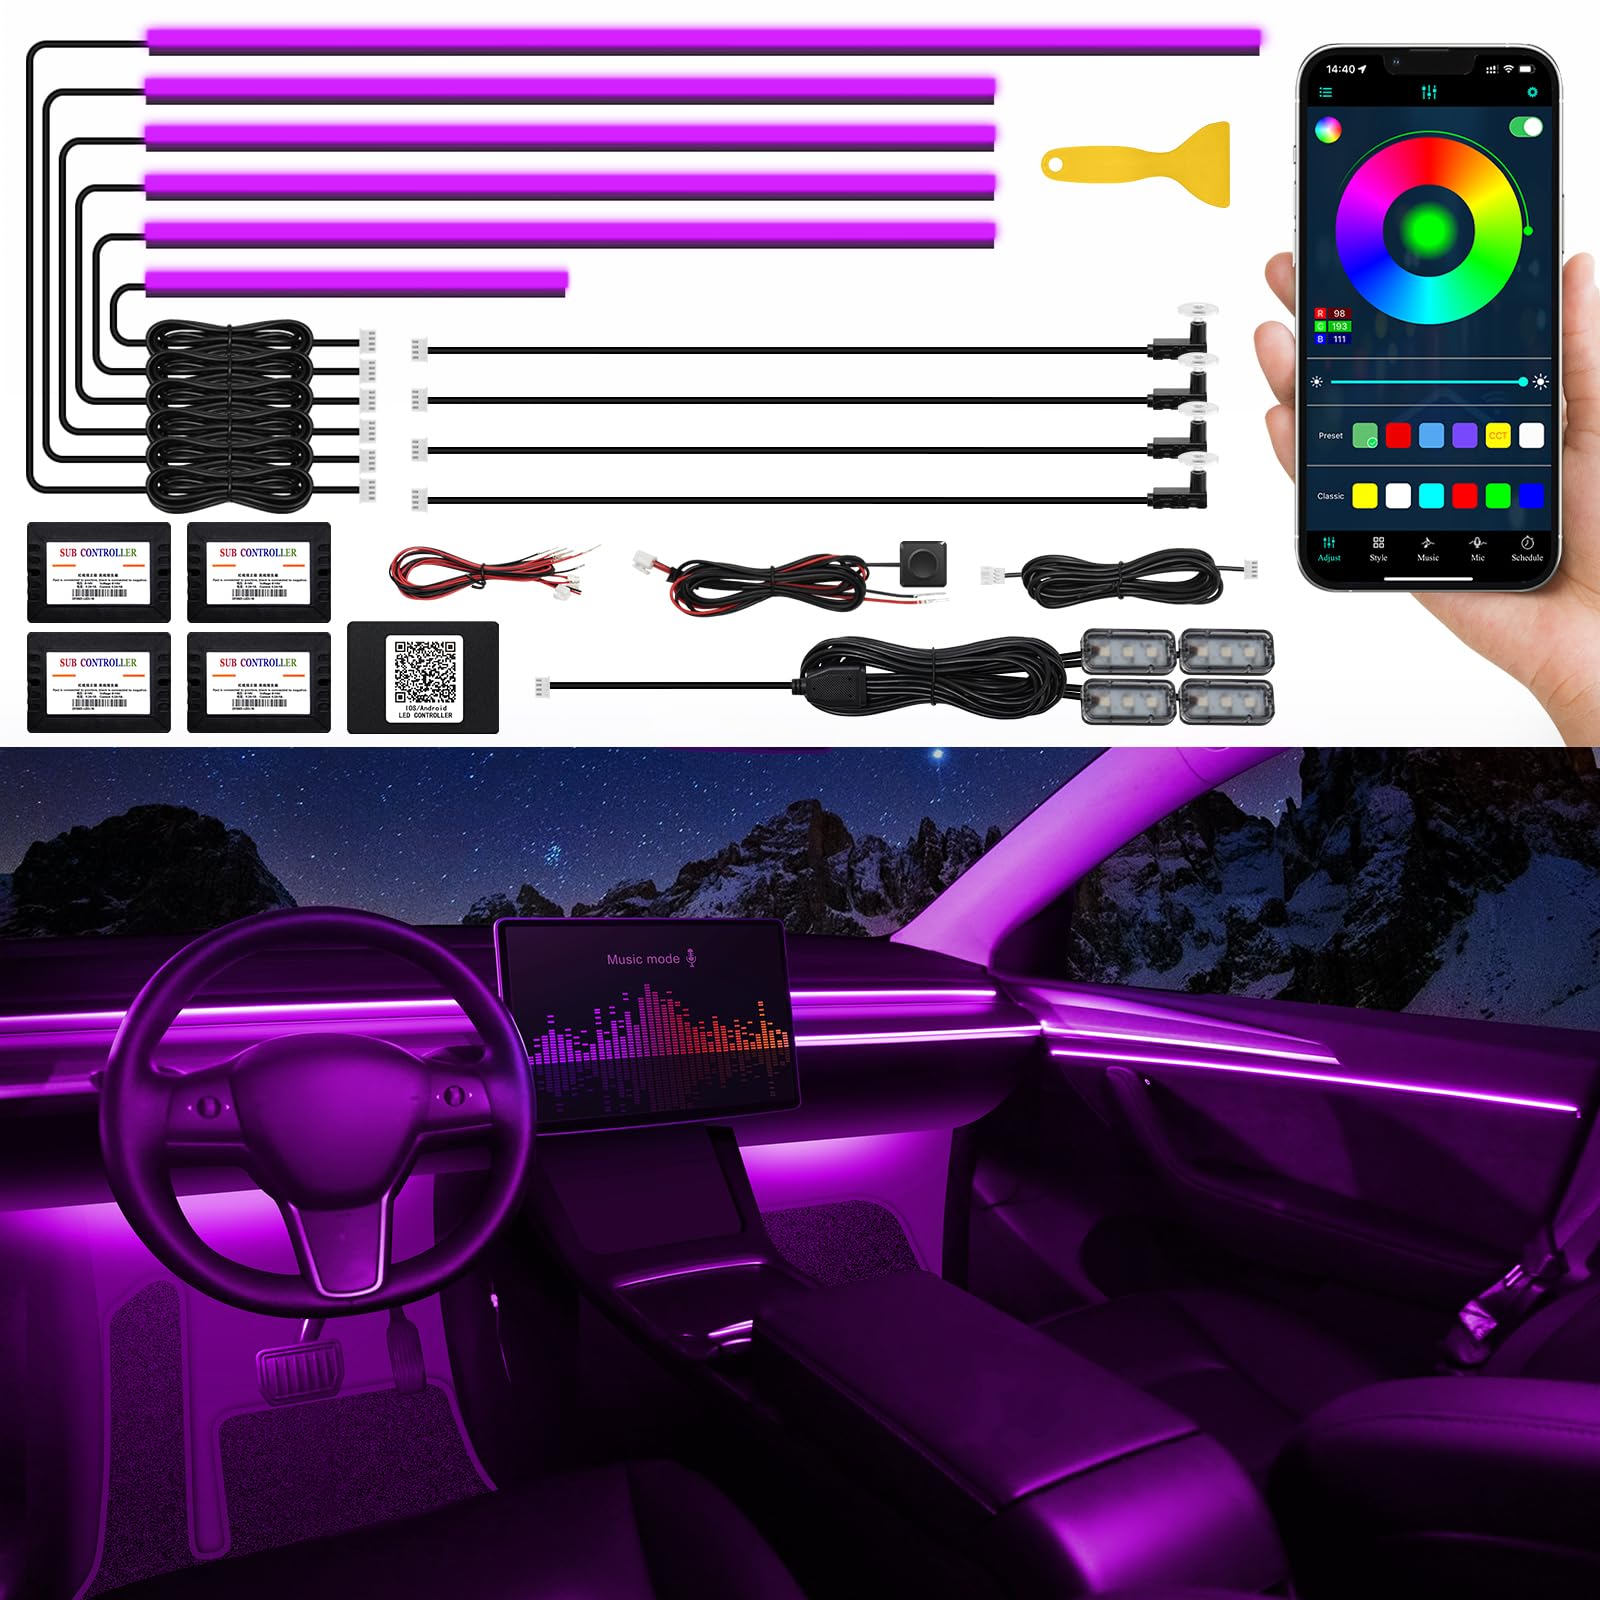 TWETIZ Acrylic Interior LED Strip Light for Car with Wireless APP, RGB 14 in 1 with 175 inches 593 LEDs Fiber Optic Ambient Lighting Kits, 16 Million Colors Sync to Music Function LED Strip for Car von TWETIZ